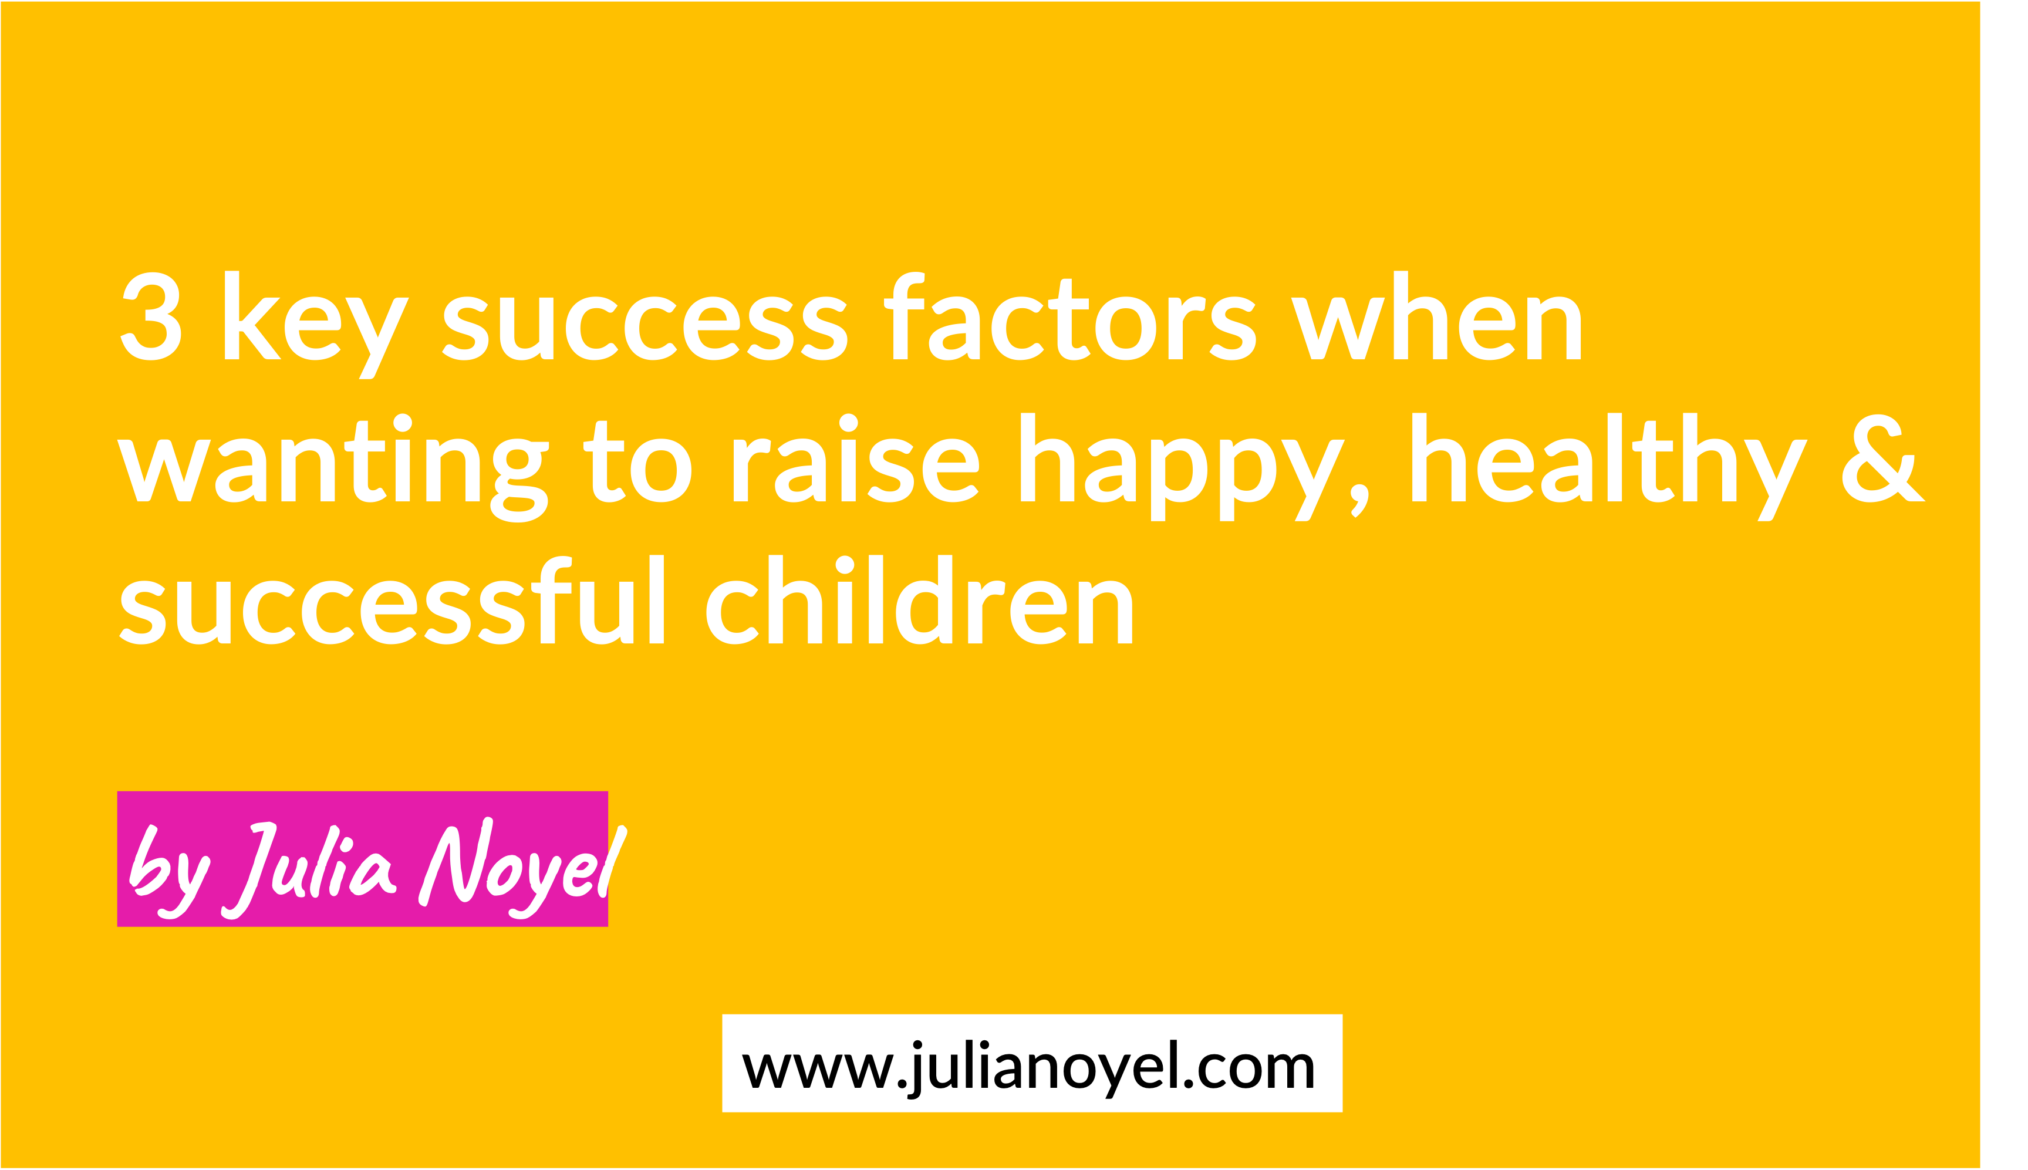 3 key success factors when wanting to raise happy, healthy & successful children by Julia Noyel